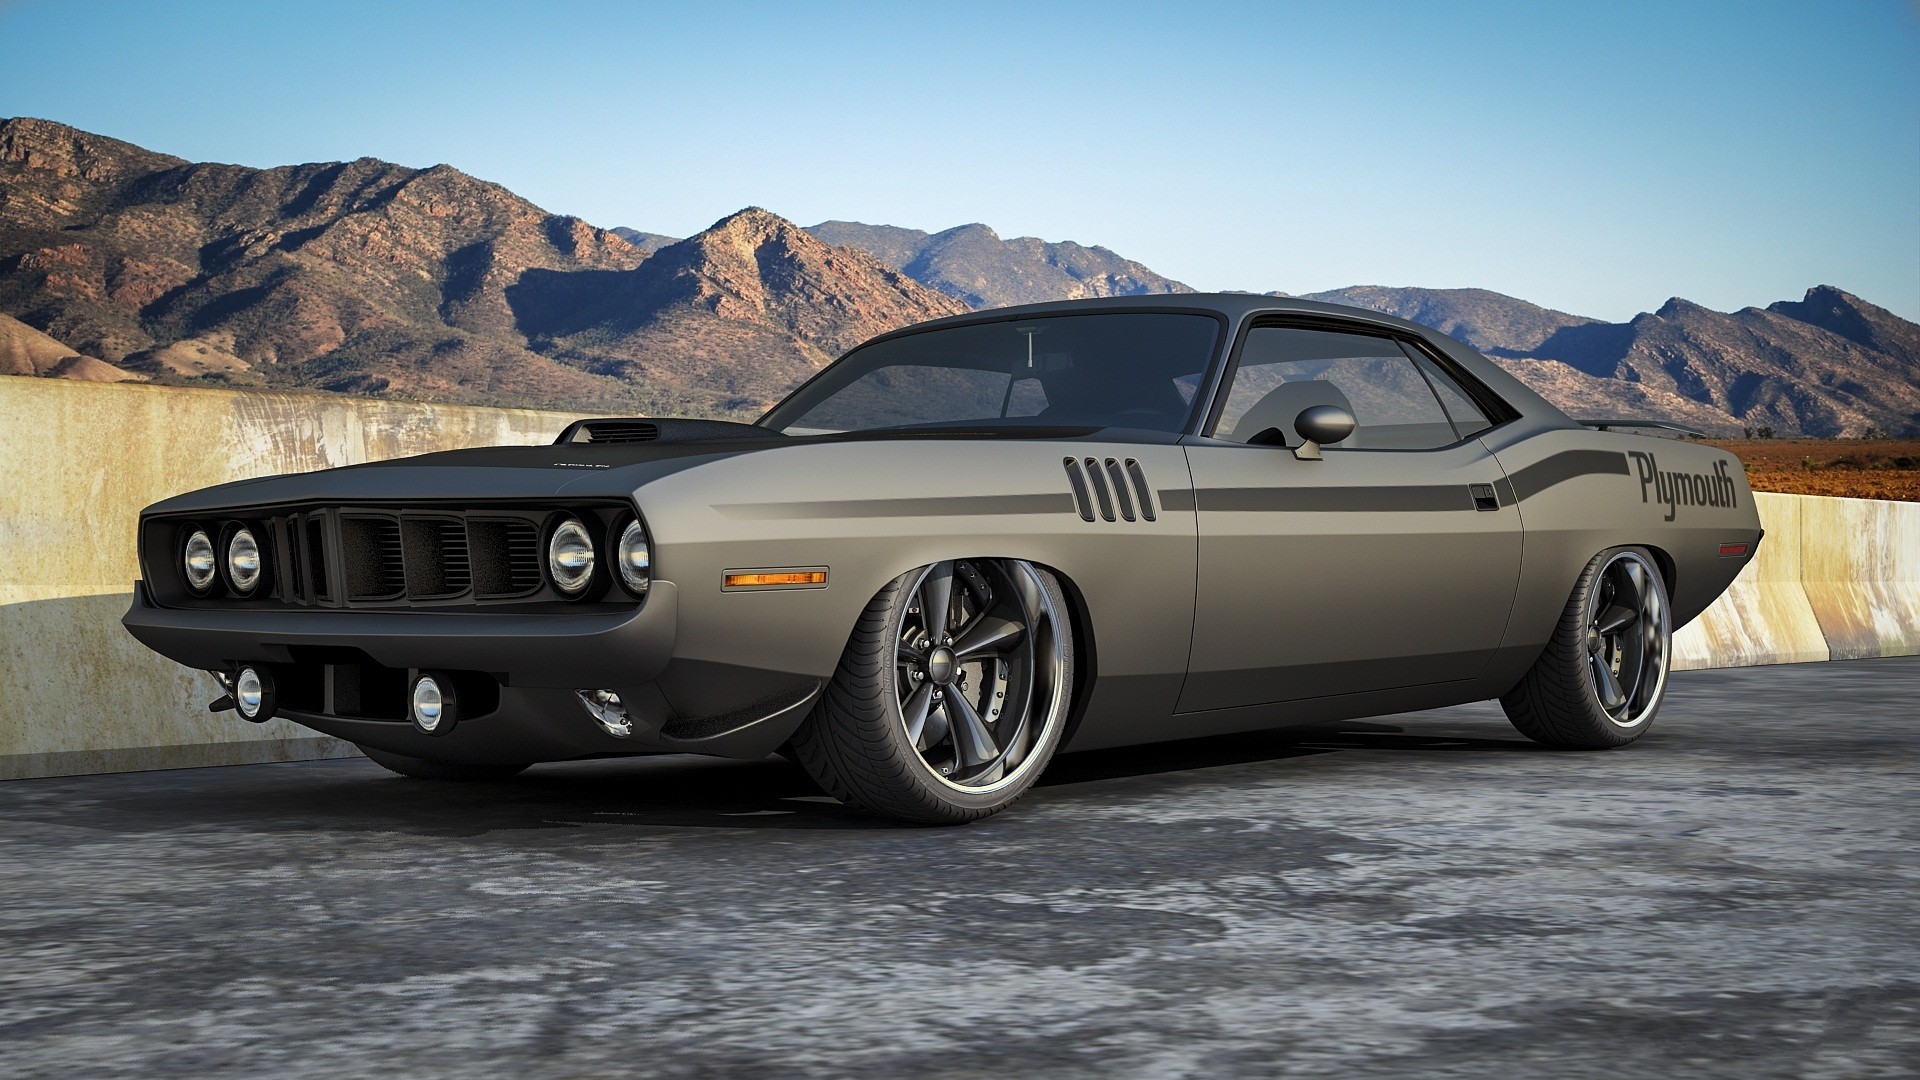 1920x1080 Download Muscle Car Background Free.